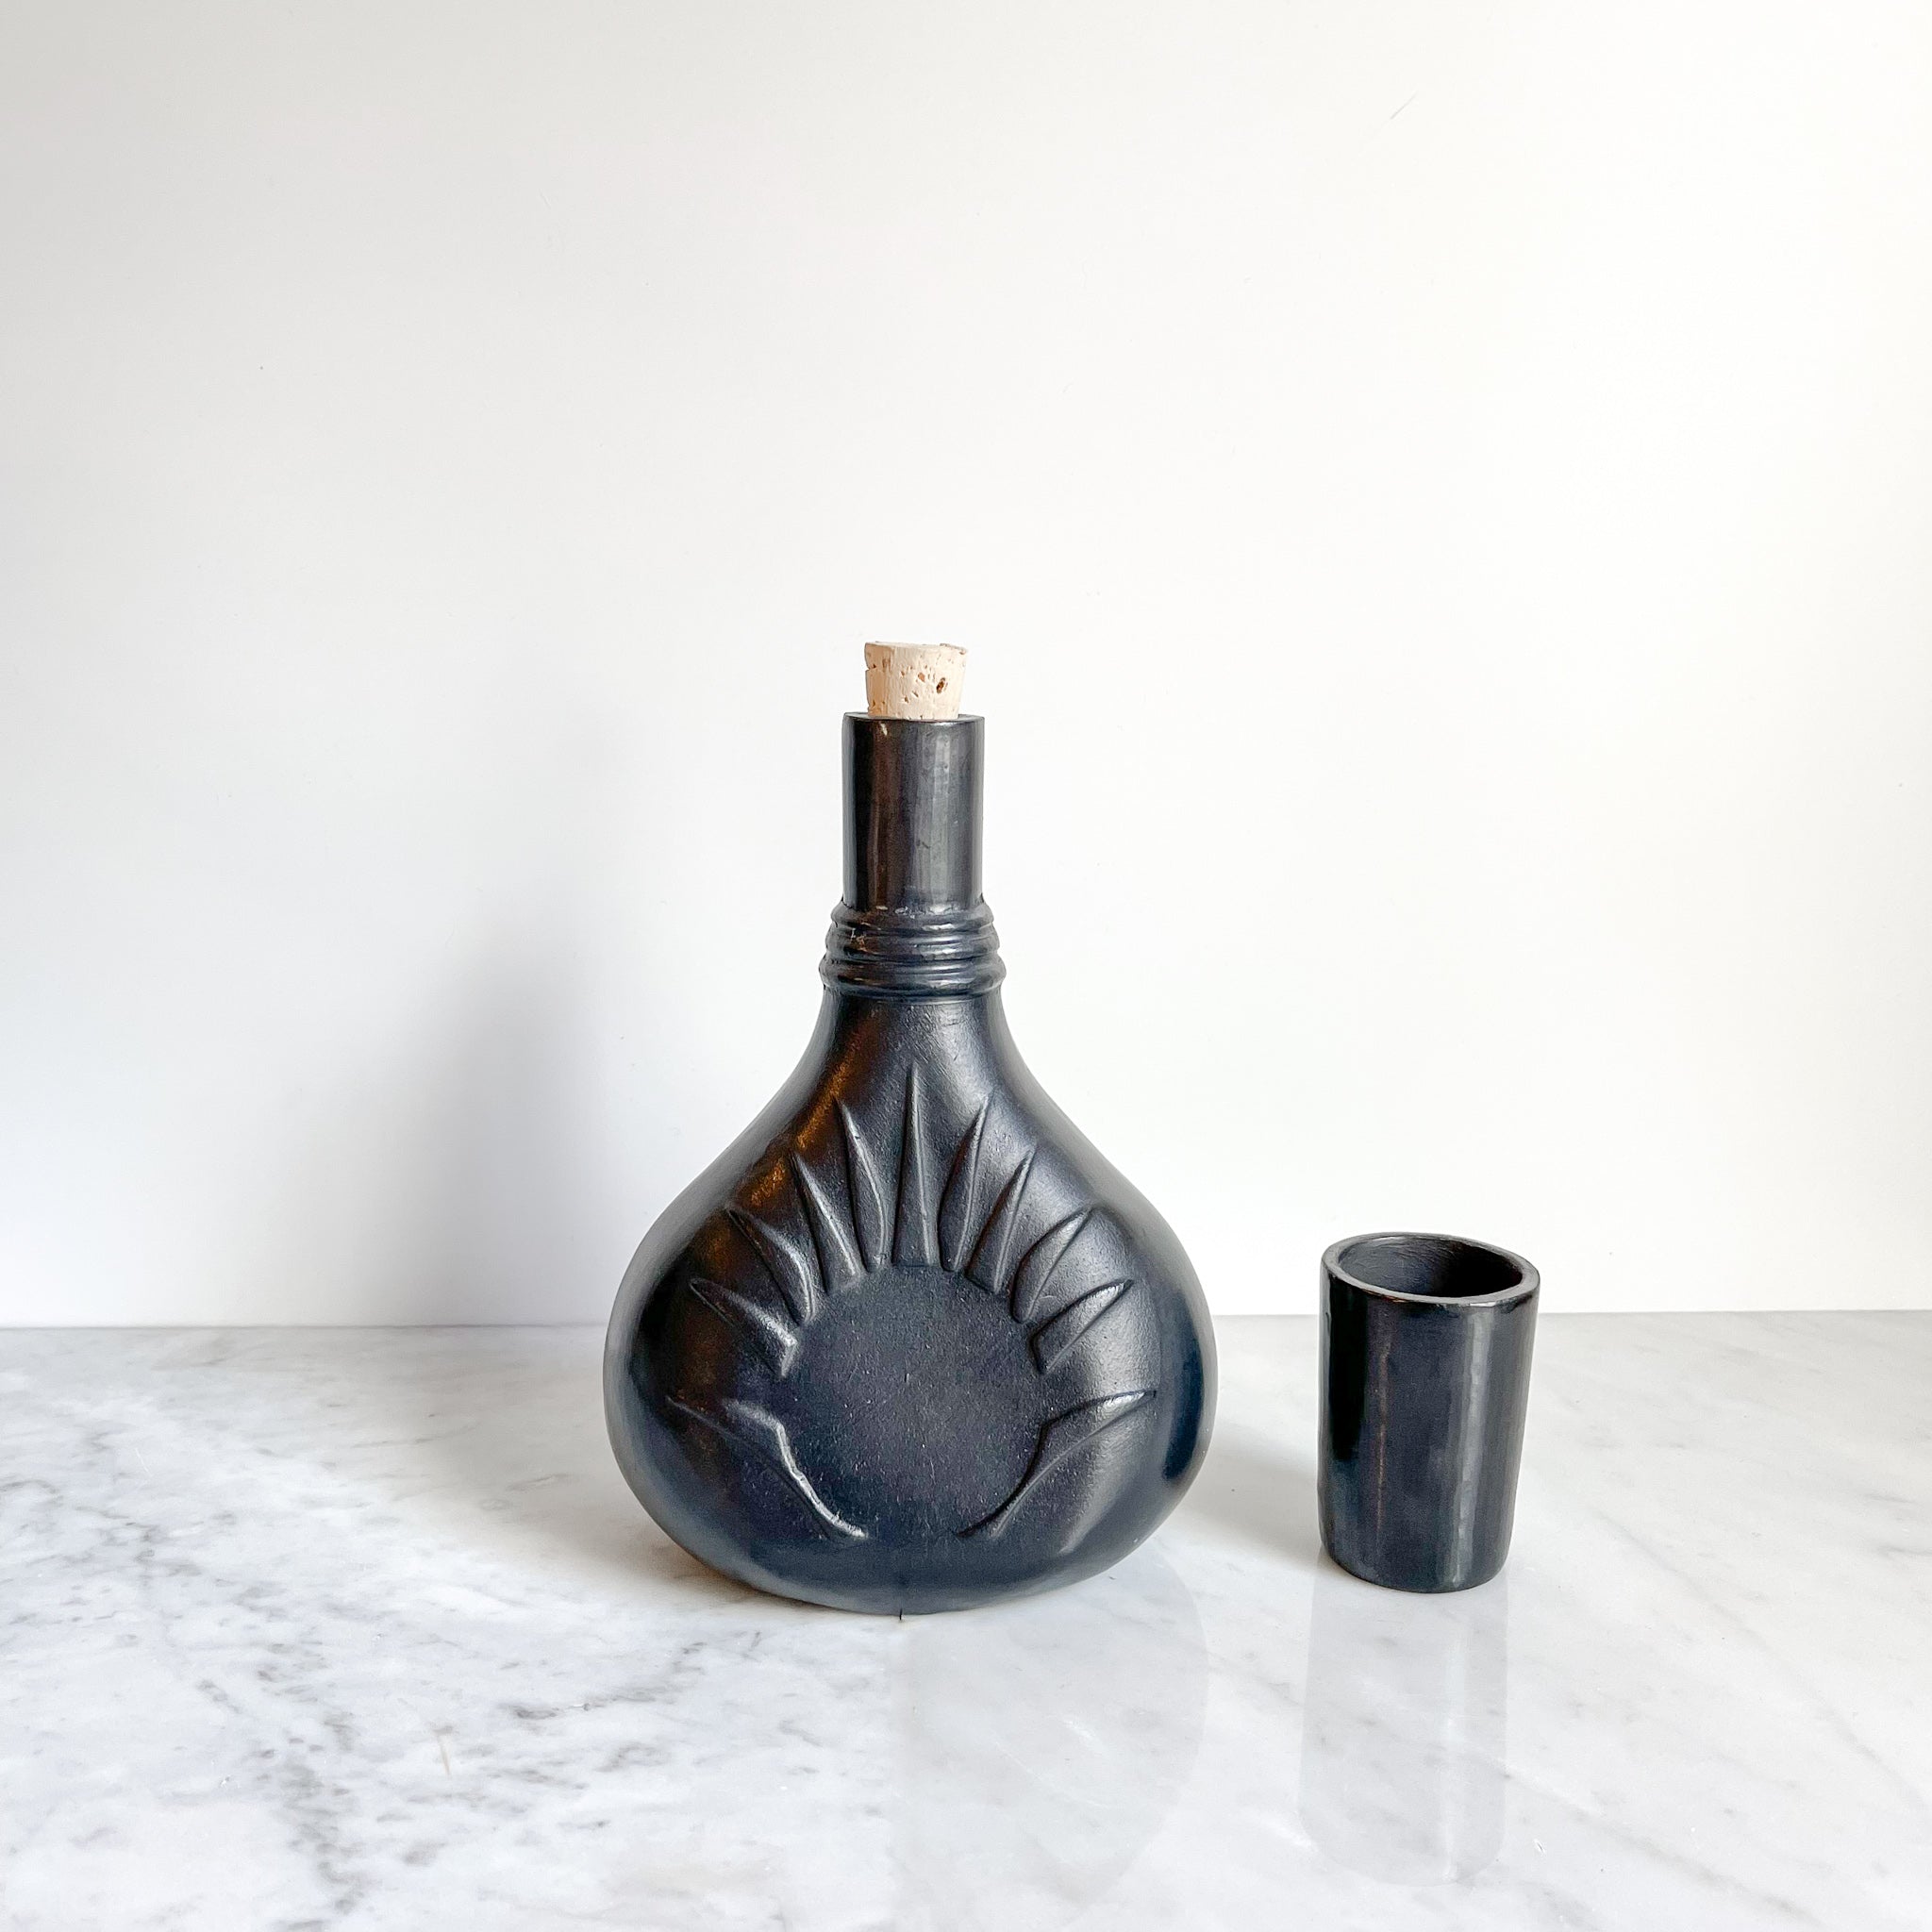 Black clay mezcal vessel with an agave inspired design handmade in Oaxaca, Mexico.